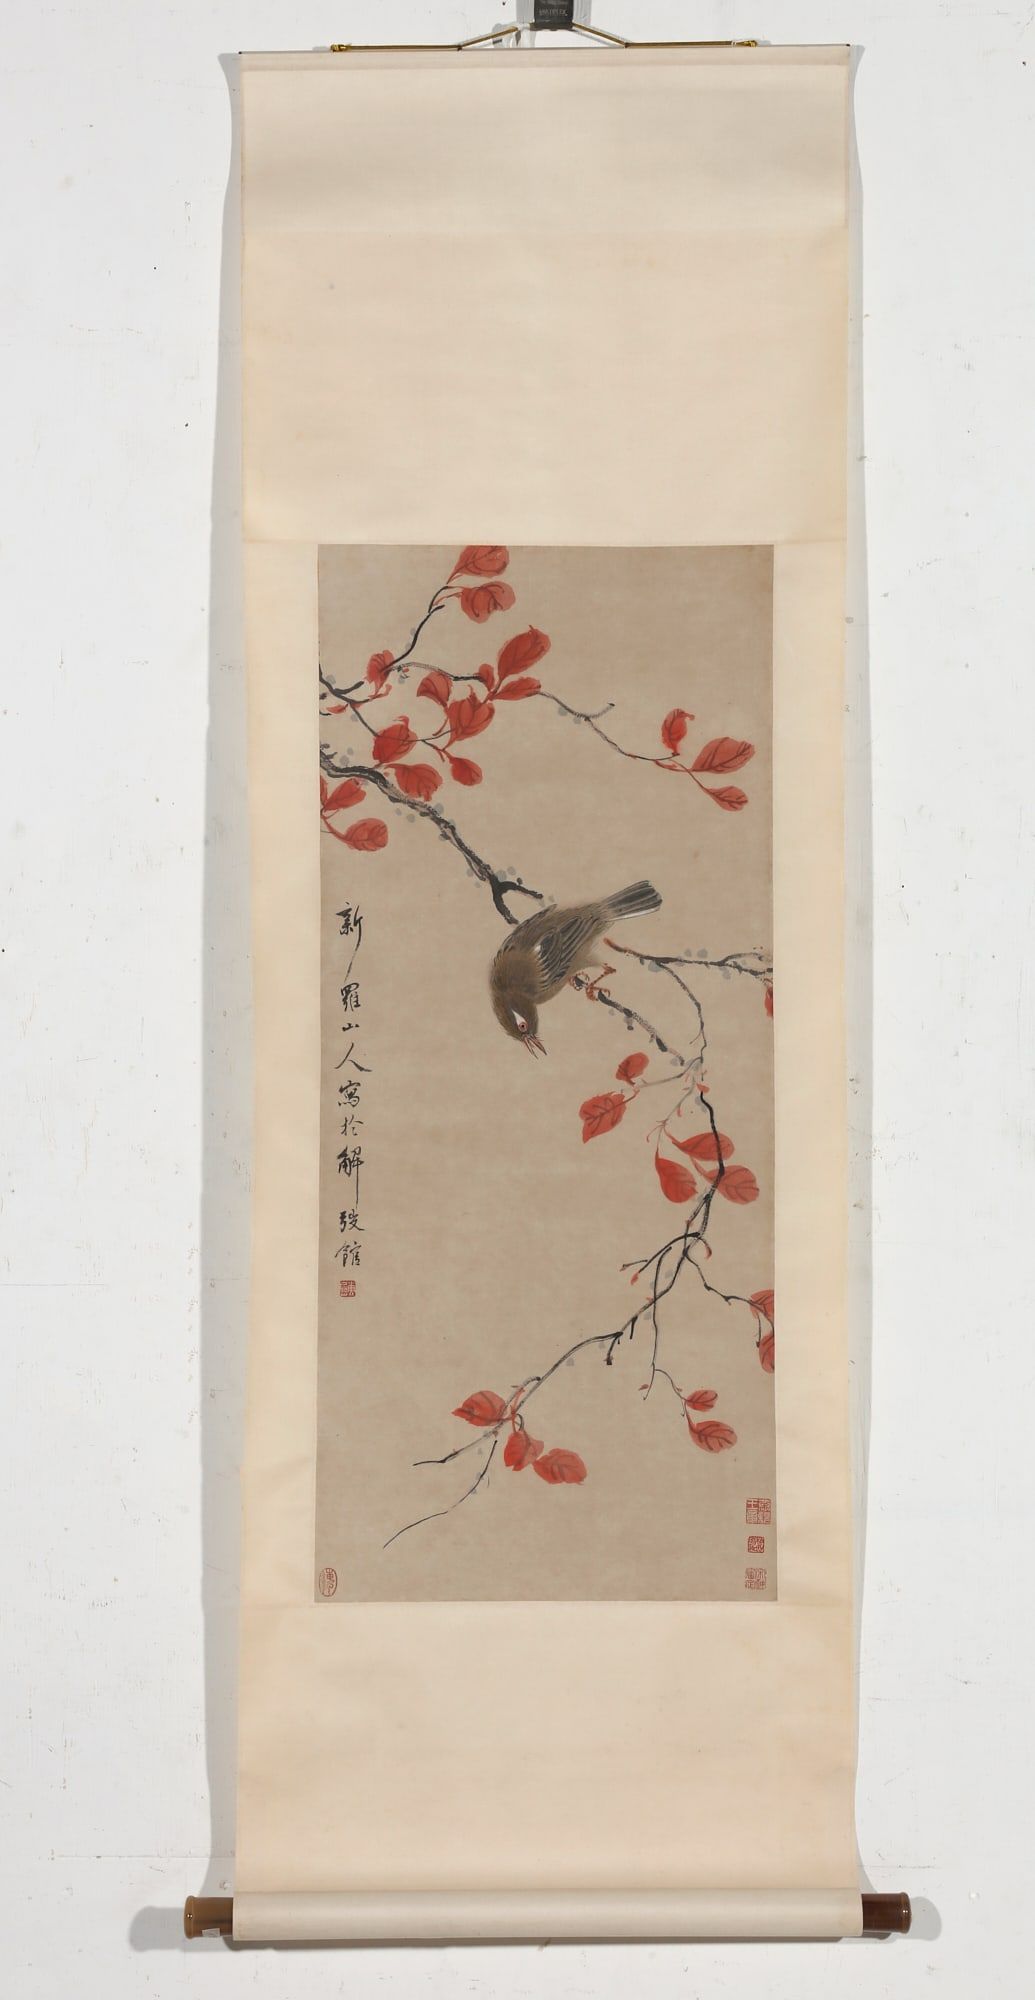 A CHINESE SCROLL DEPICTING A BIRD